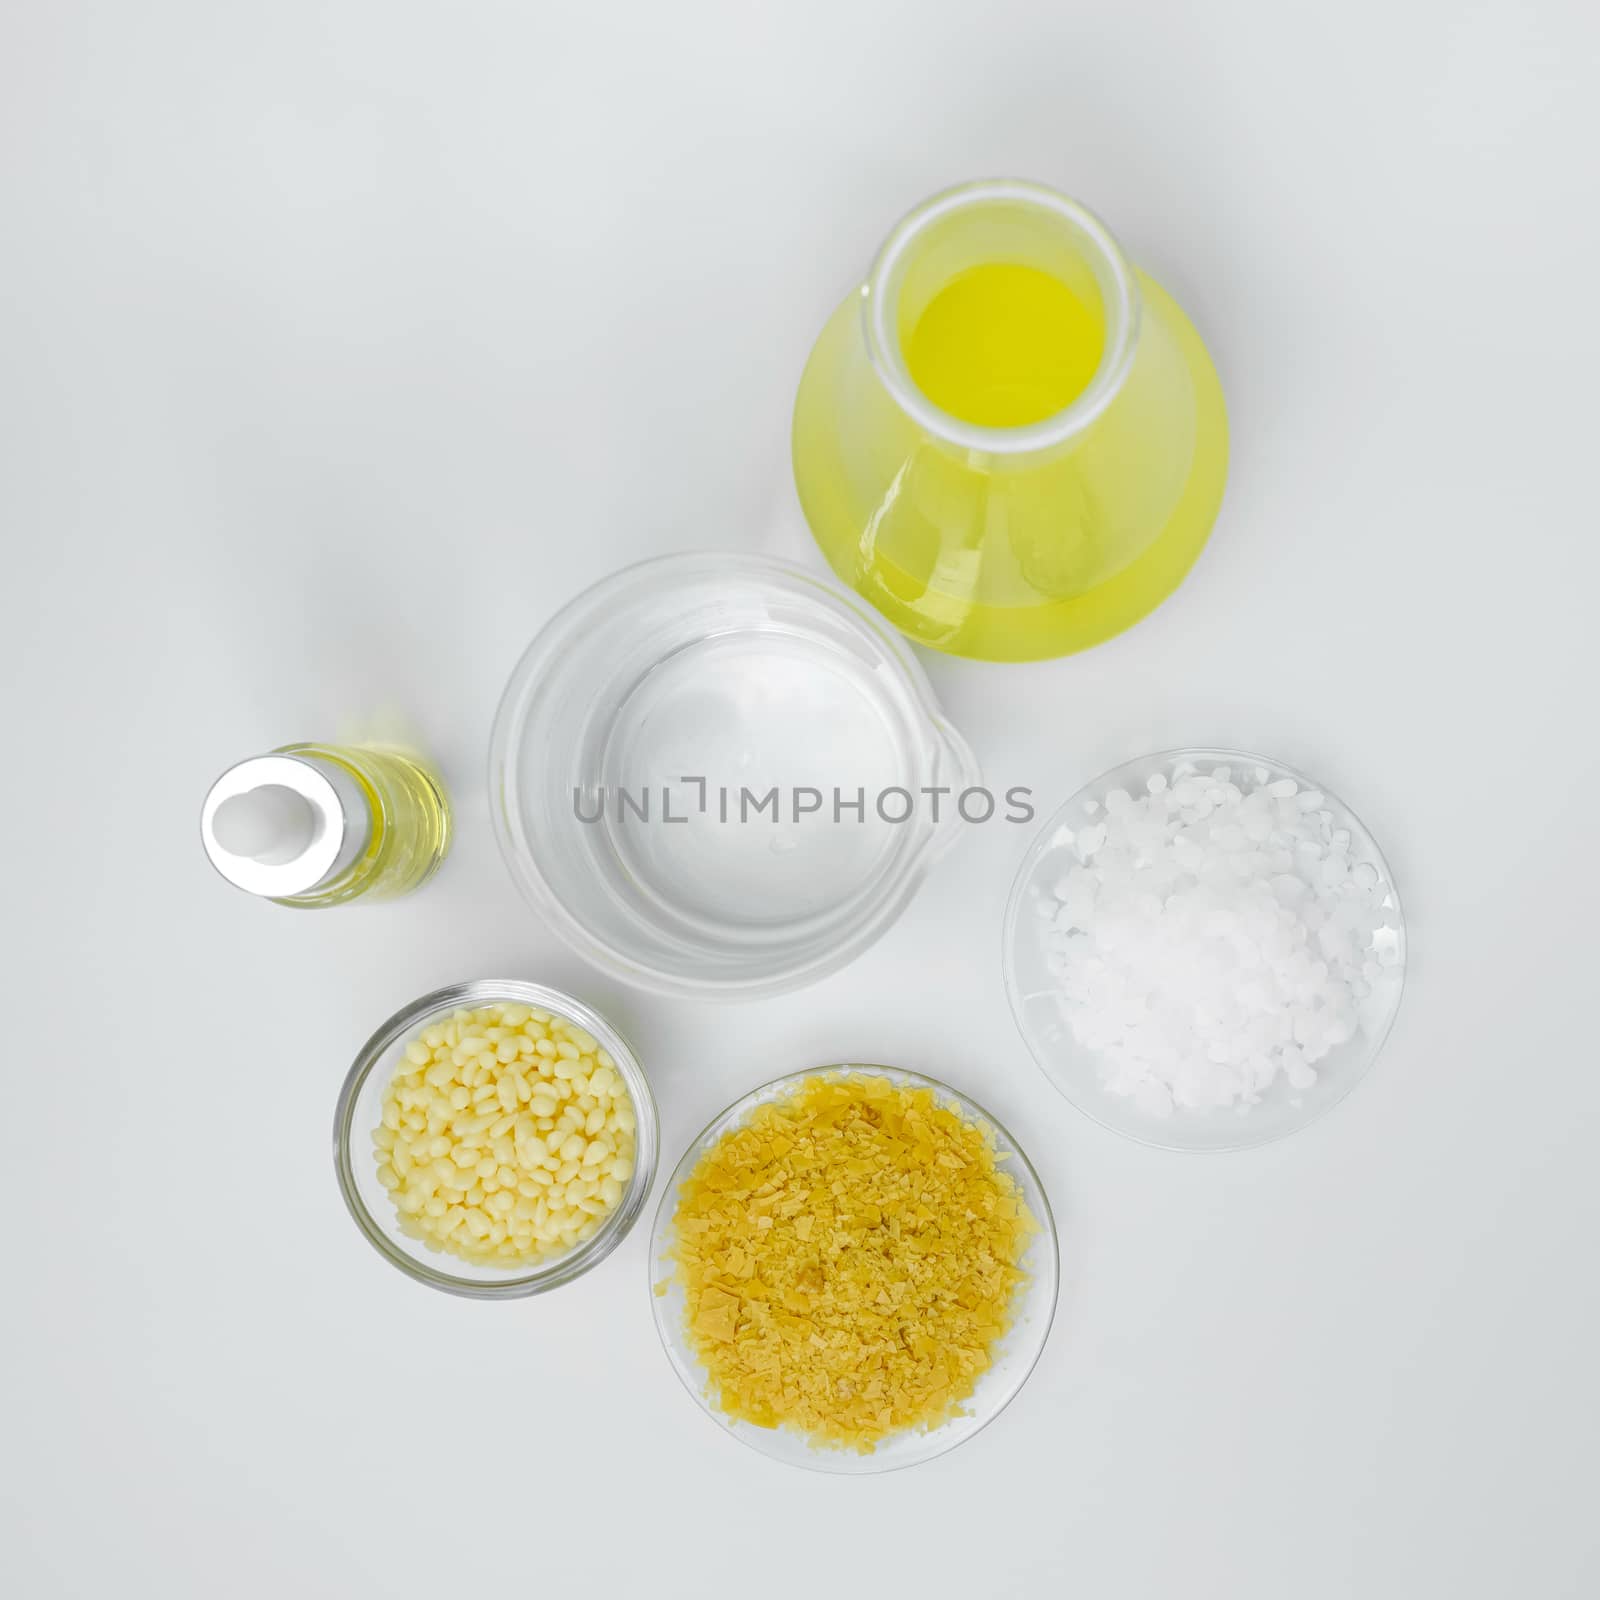 Cosmetic chemicals ingredient on white laboratory table. Carnauba Wax Flakes SP-200, Candelilla Wax SP-75, Microcrystalline wax, Nickle chloride liquid, alcohol